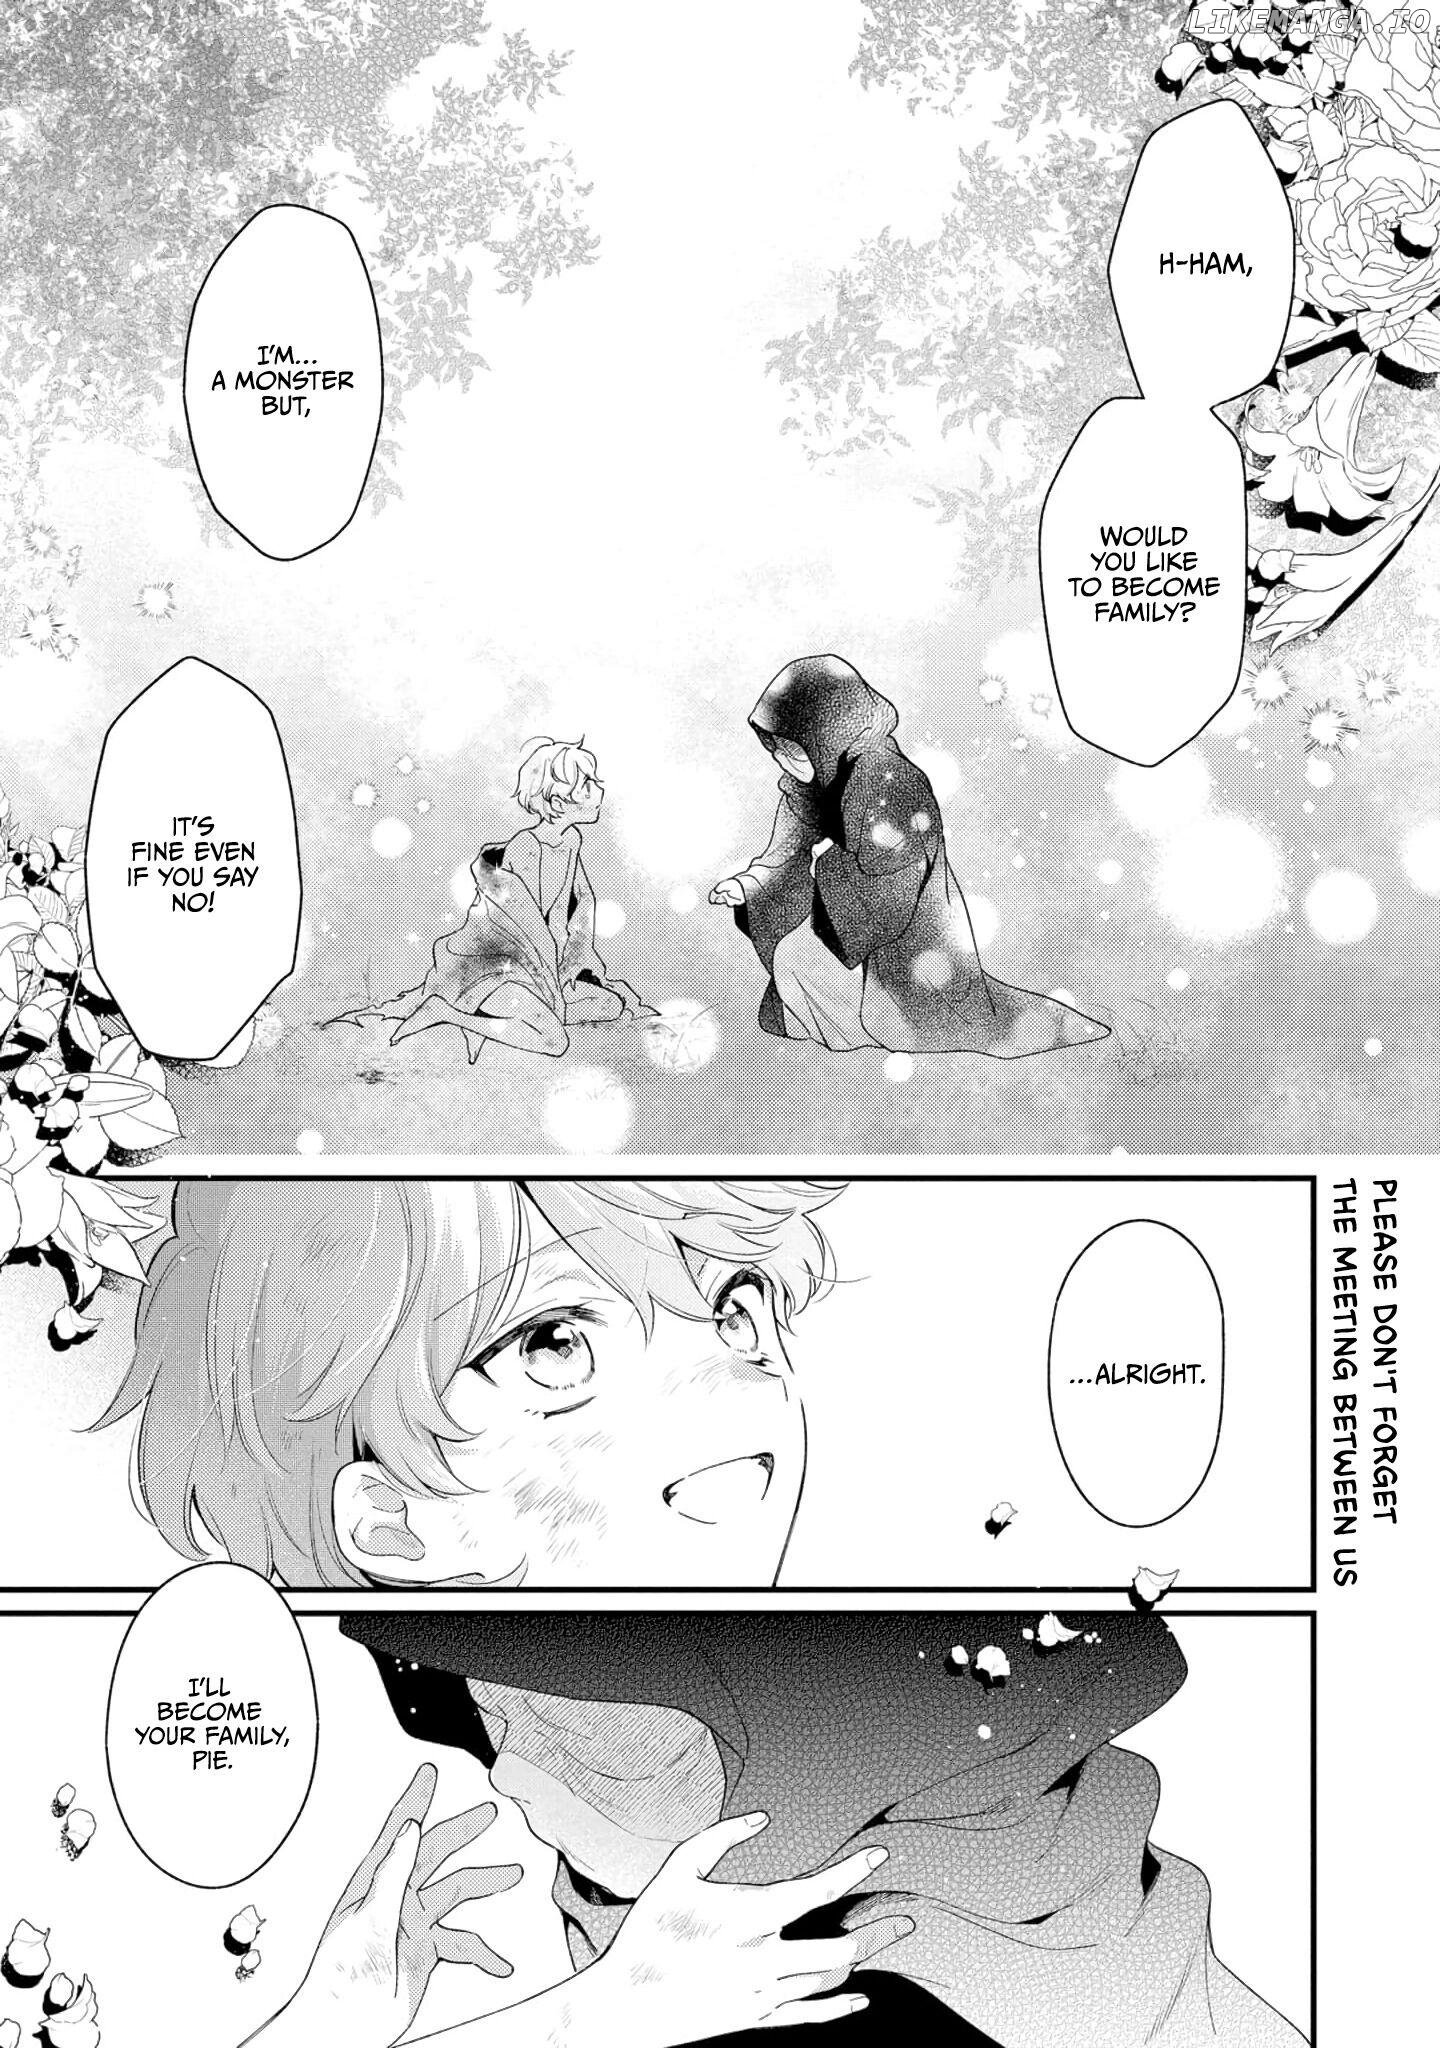 The Silent Daughter of a Duke and the Cold Emperor ~ The Child I Found in My Past Life Became the Emperor ~ Chapter 1 - page 2